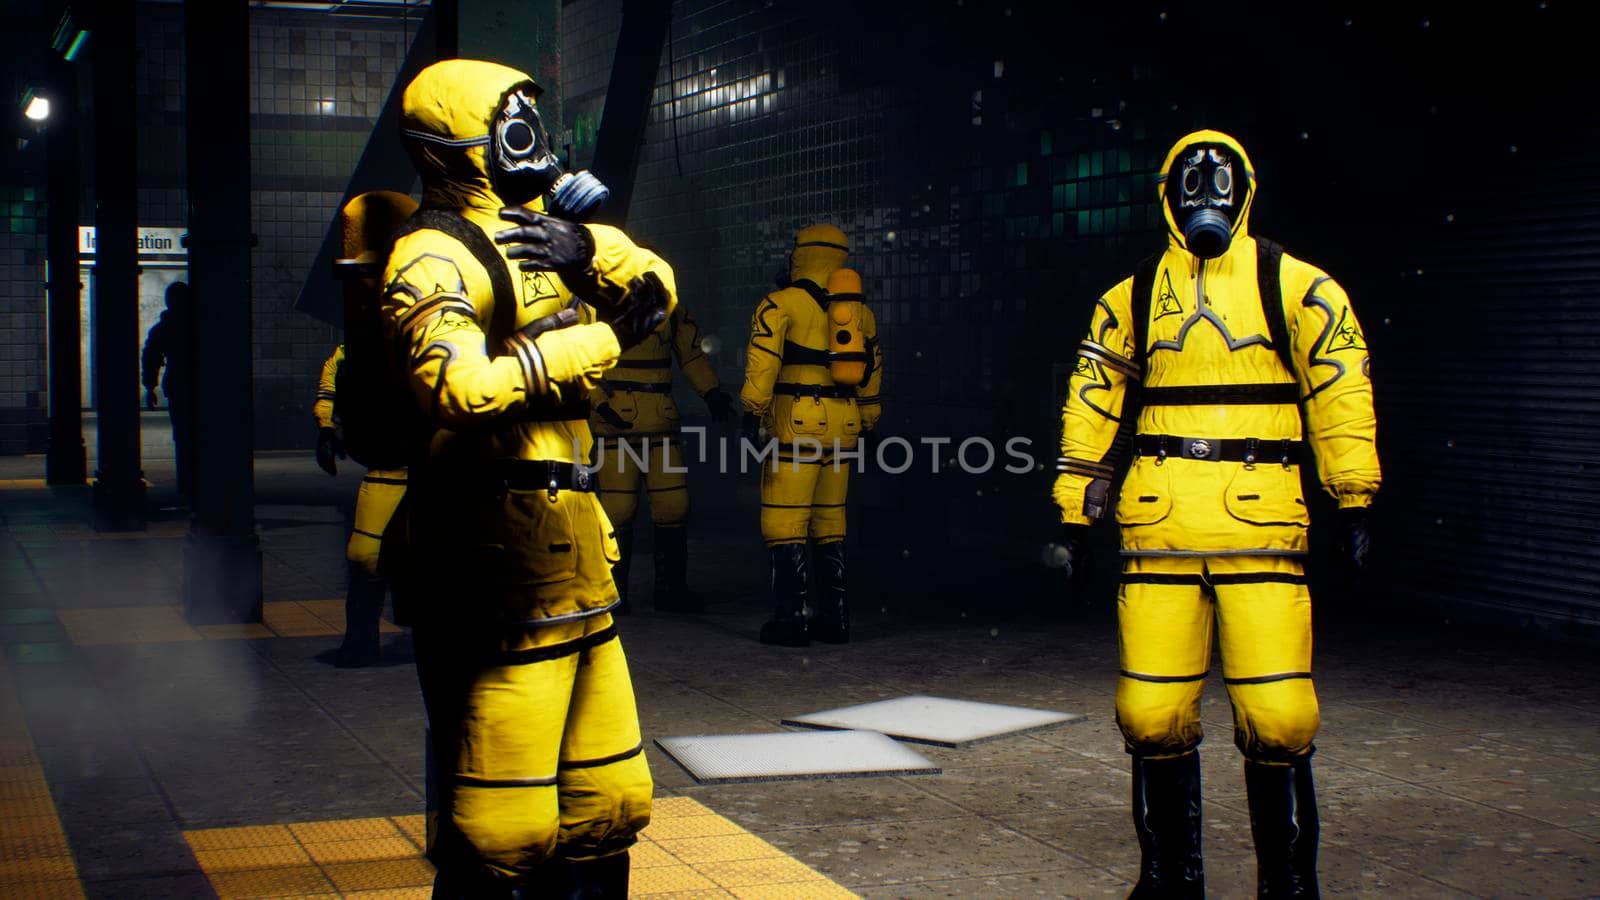 Doctors in protective chemical clothing are waiting for the train to go to fight the pandemic. The concept of a post-apocalyptic world after a global pandemic.